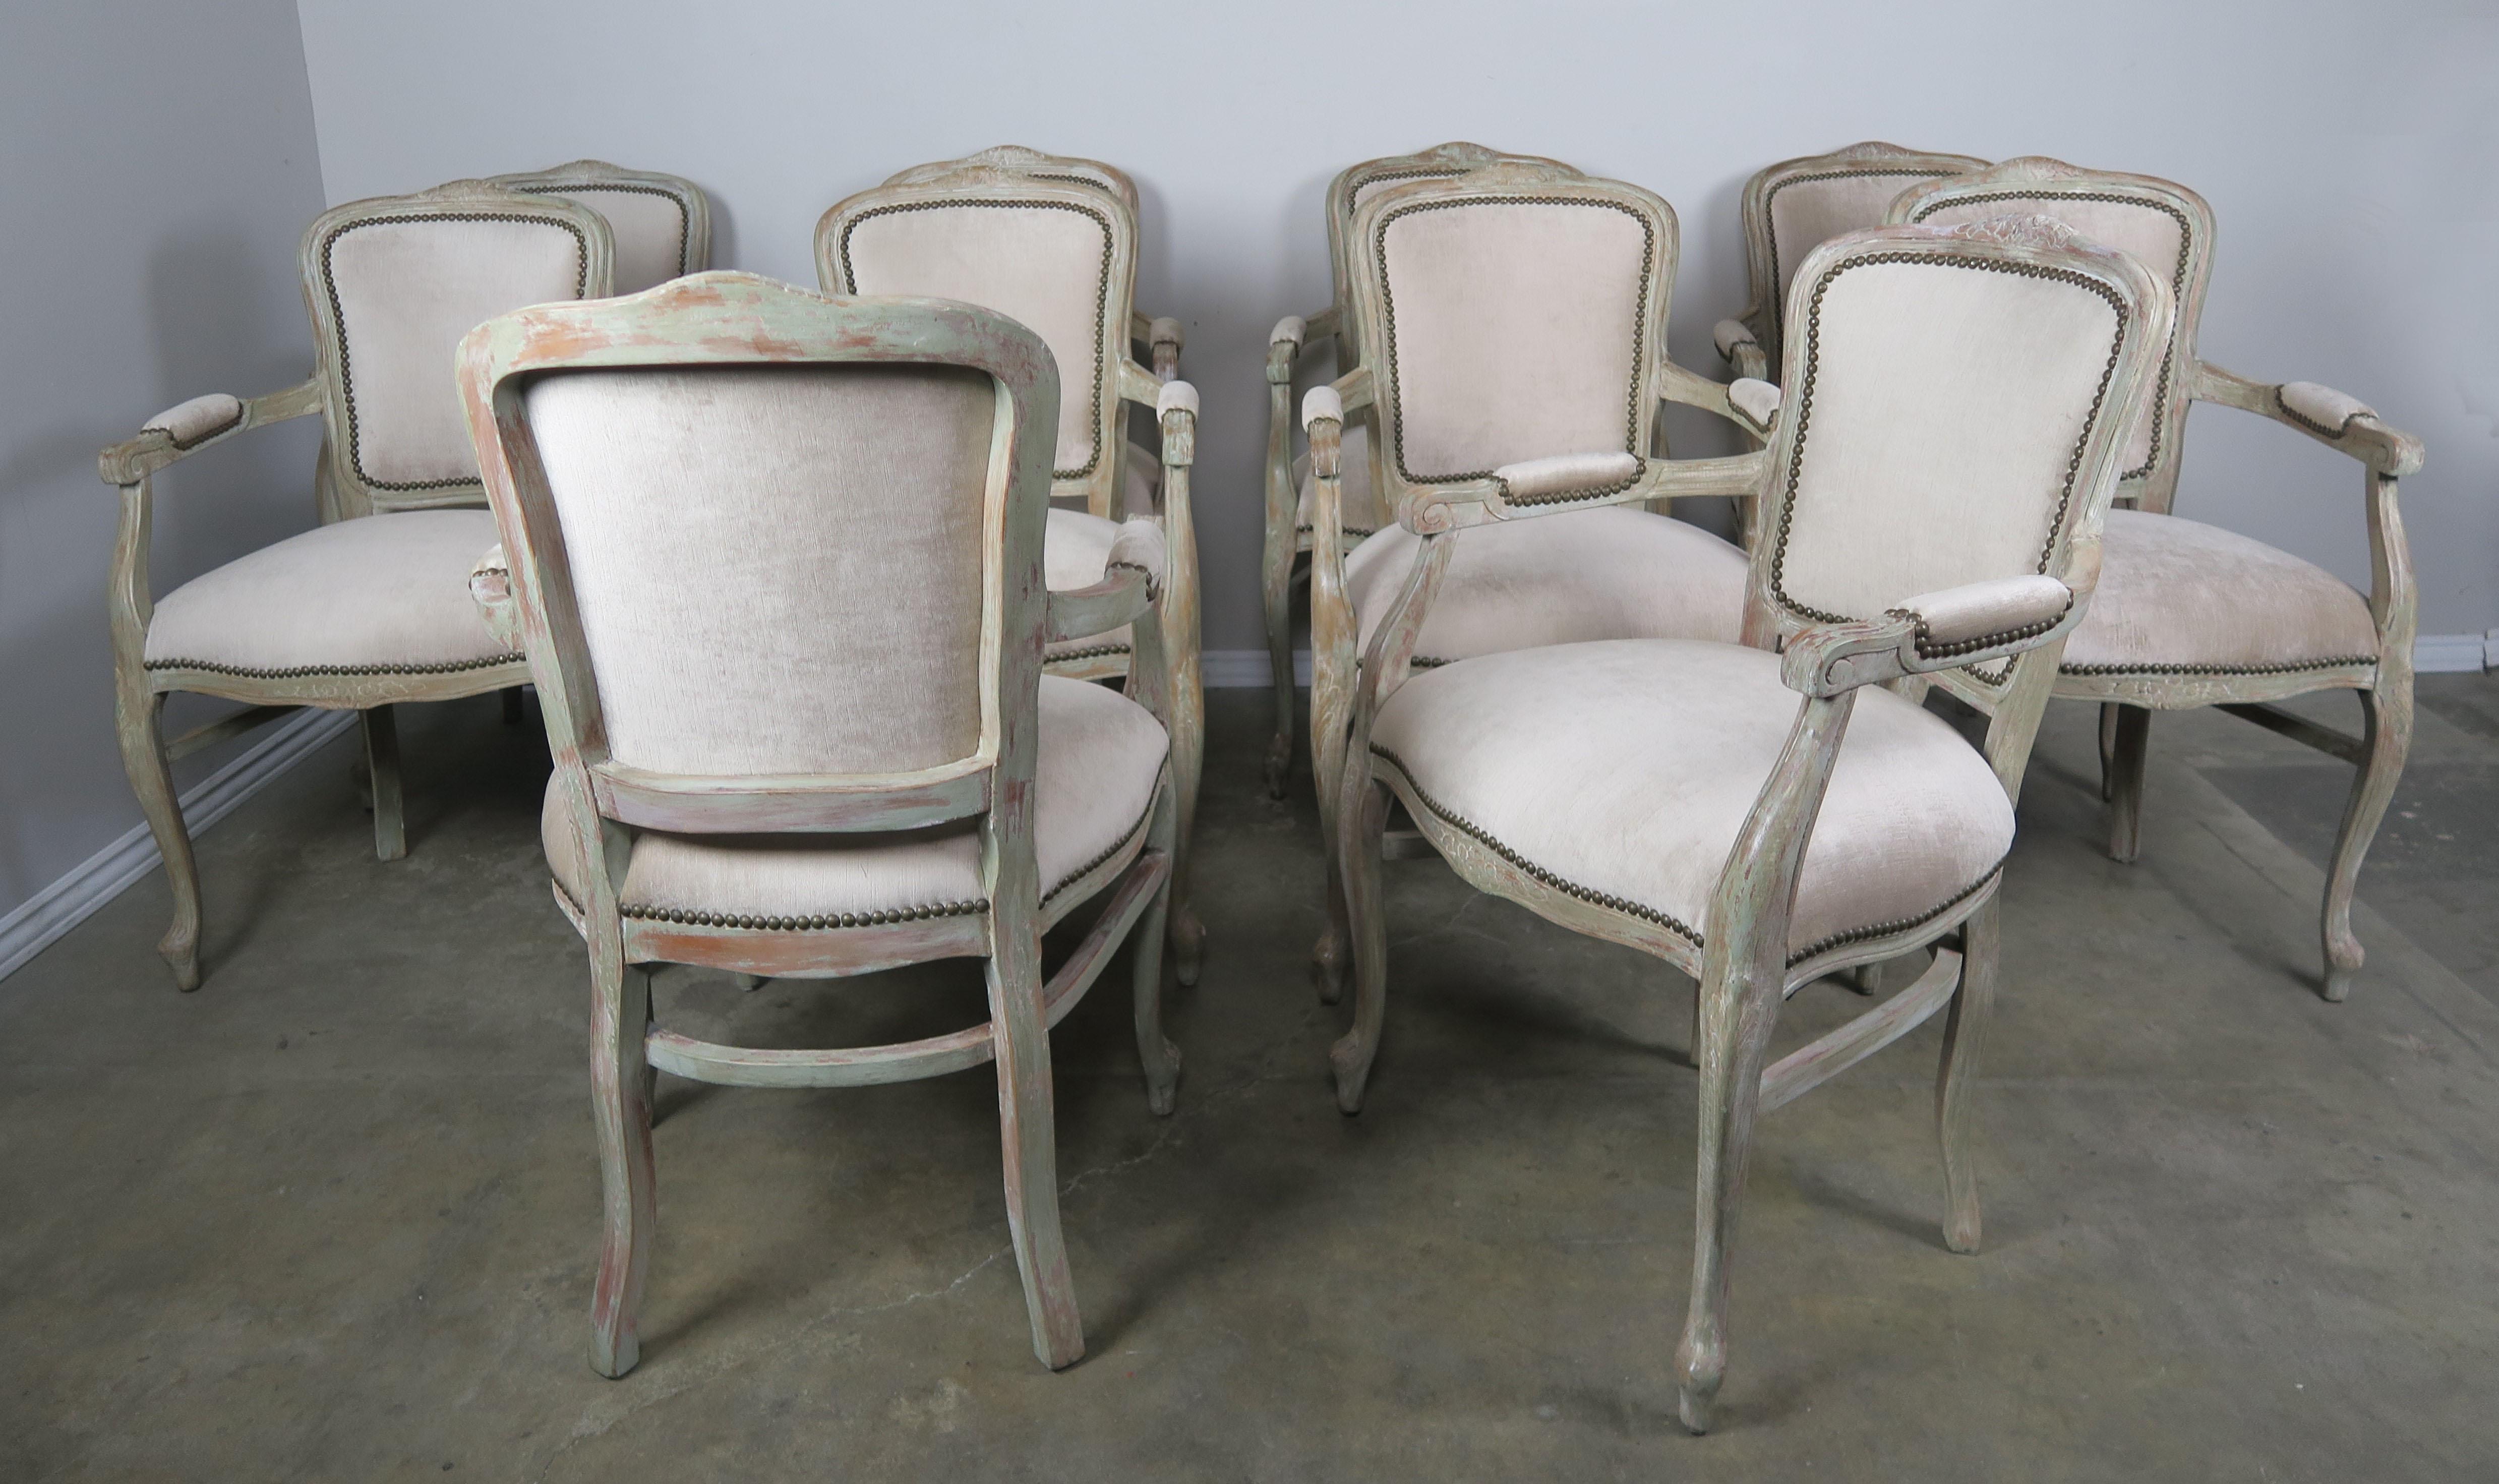 Set of ten French carved Louis XV style armchairs softly painted with remnants of aqua paint left behind. The armchairs are newly upholstered in a cream colored linen velvet with antique brass nailhead trim detail. The chairs stand on four cabriole